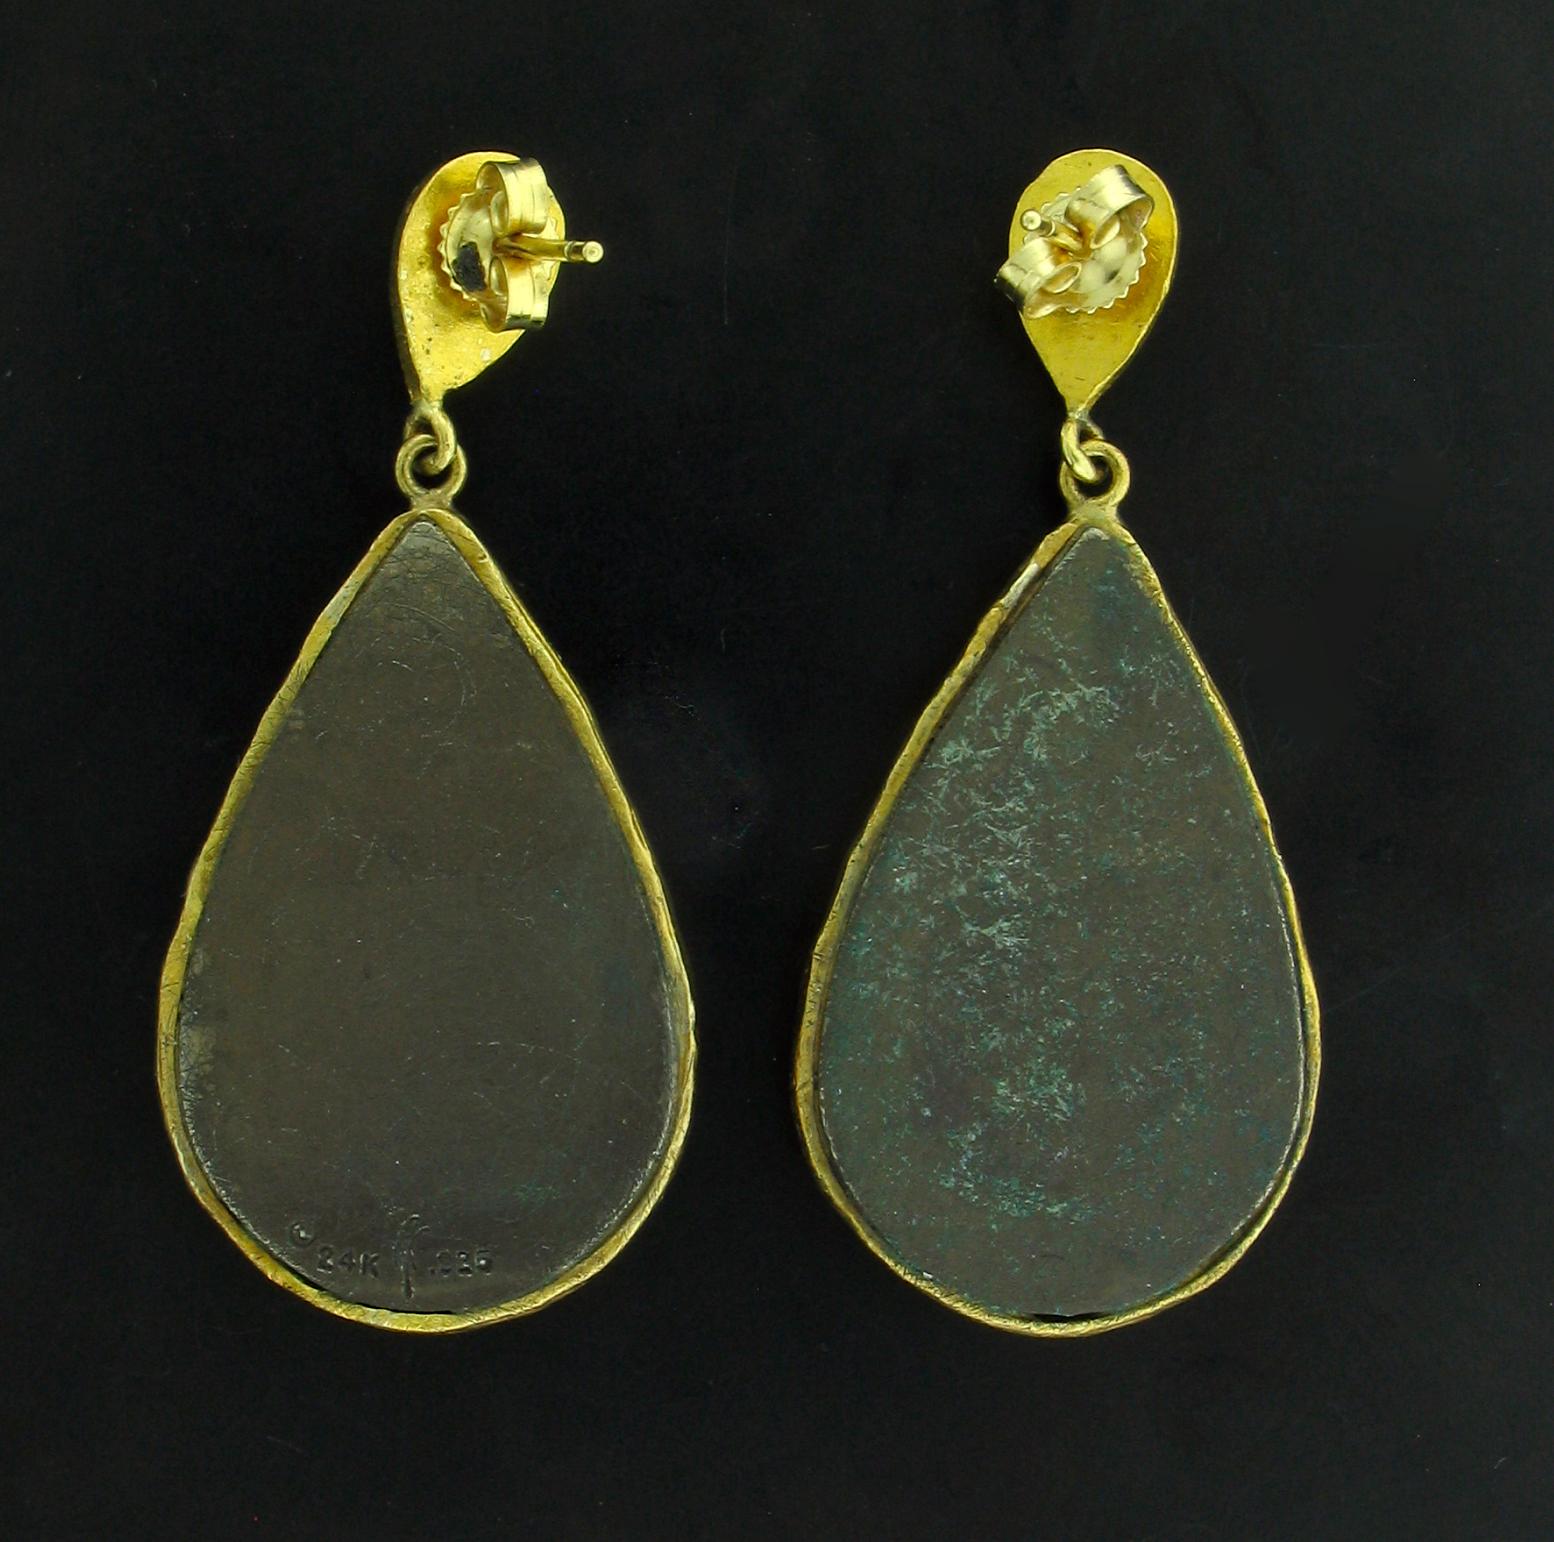 These Earrings were designed and made by well known designer Victor Velyan.   They contain 8 cabochon Chrome Diopsides weighing 1.25 carats.  They are made of a base of pure Silver with all accent work created in 24k yellow Gold.  The 'green' is a